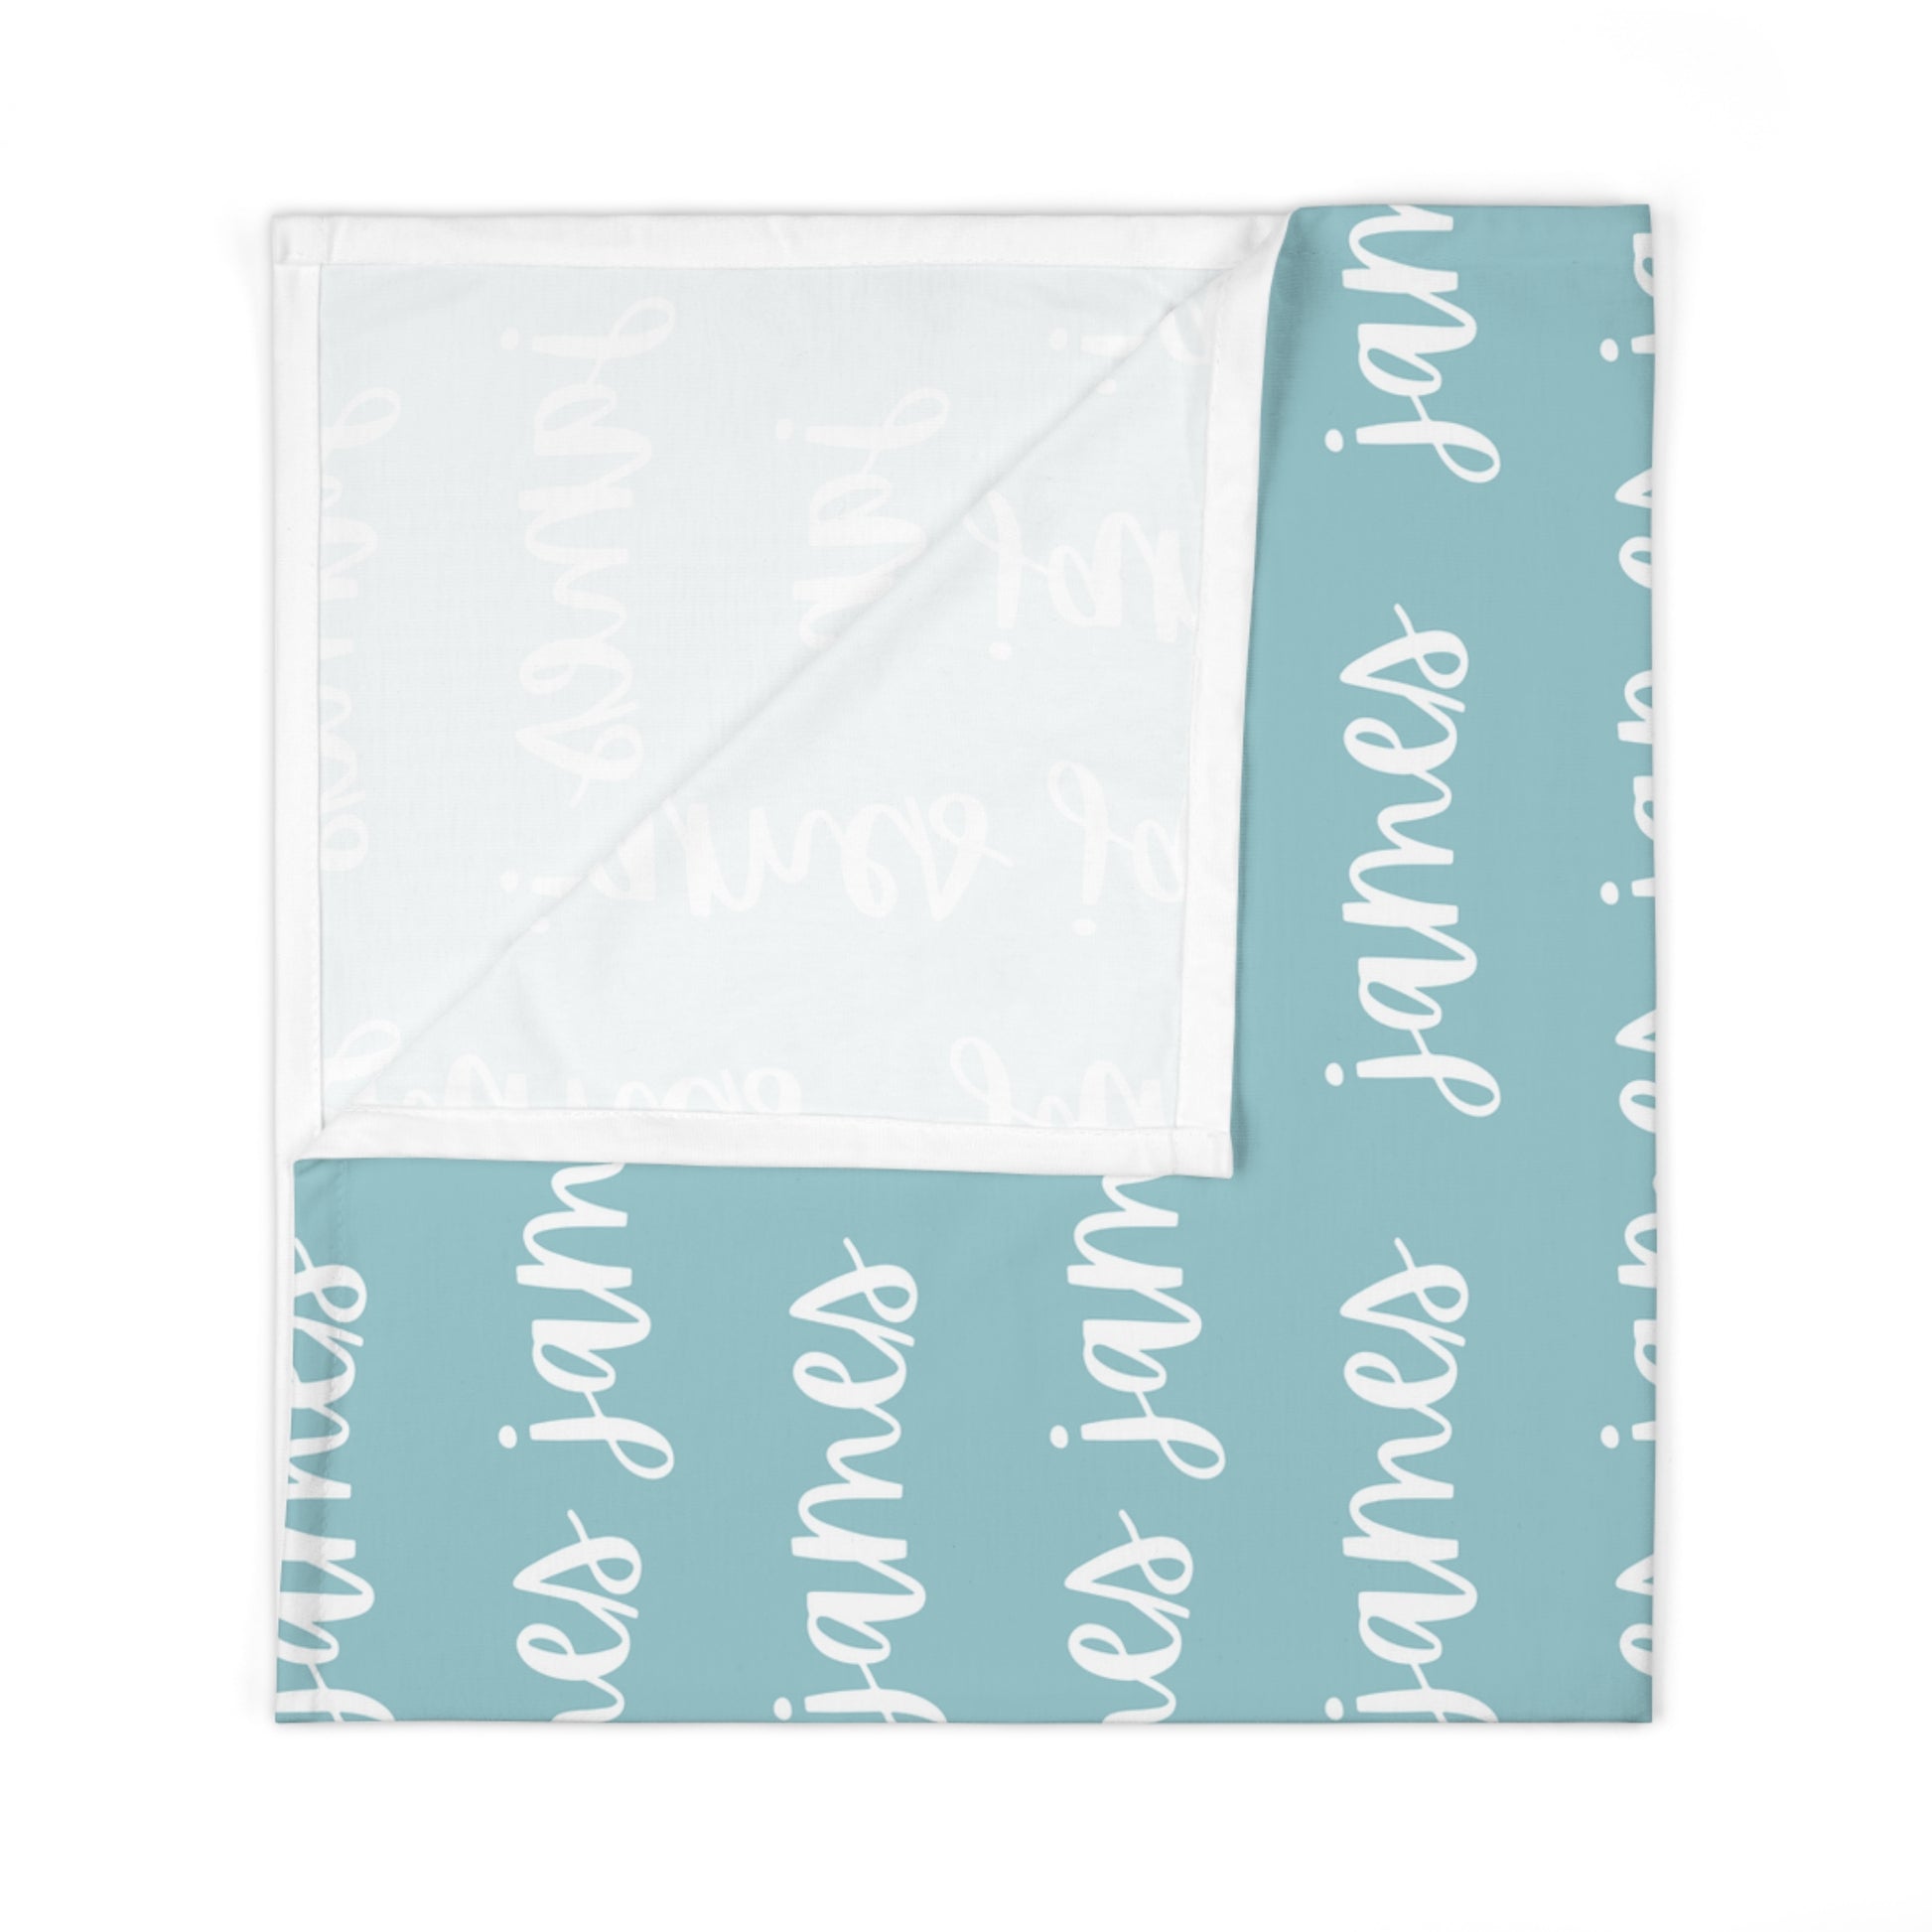 aqua blue swaddle blanket with custom name in white, made out of jersey knit. The design is printed on one side.